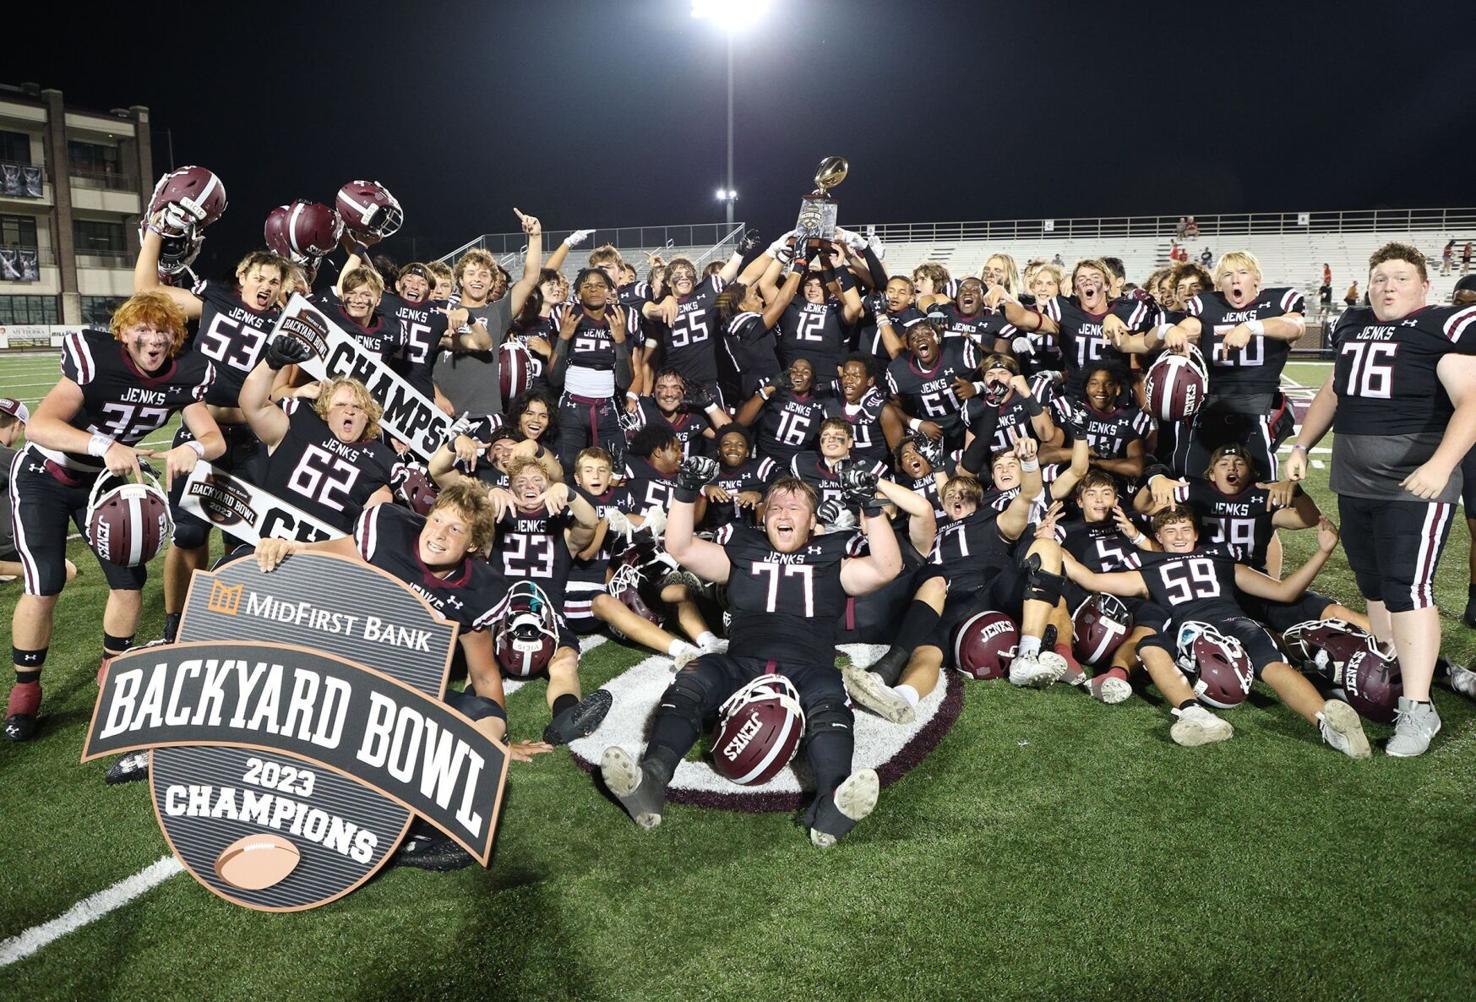 Dazzling Jenks holds on for a Backyard Bowl victory